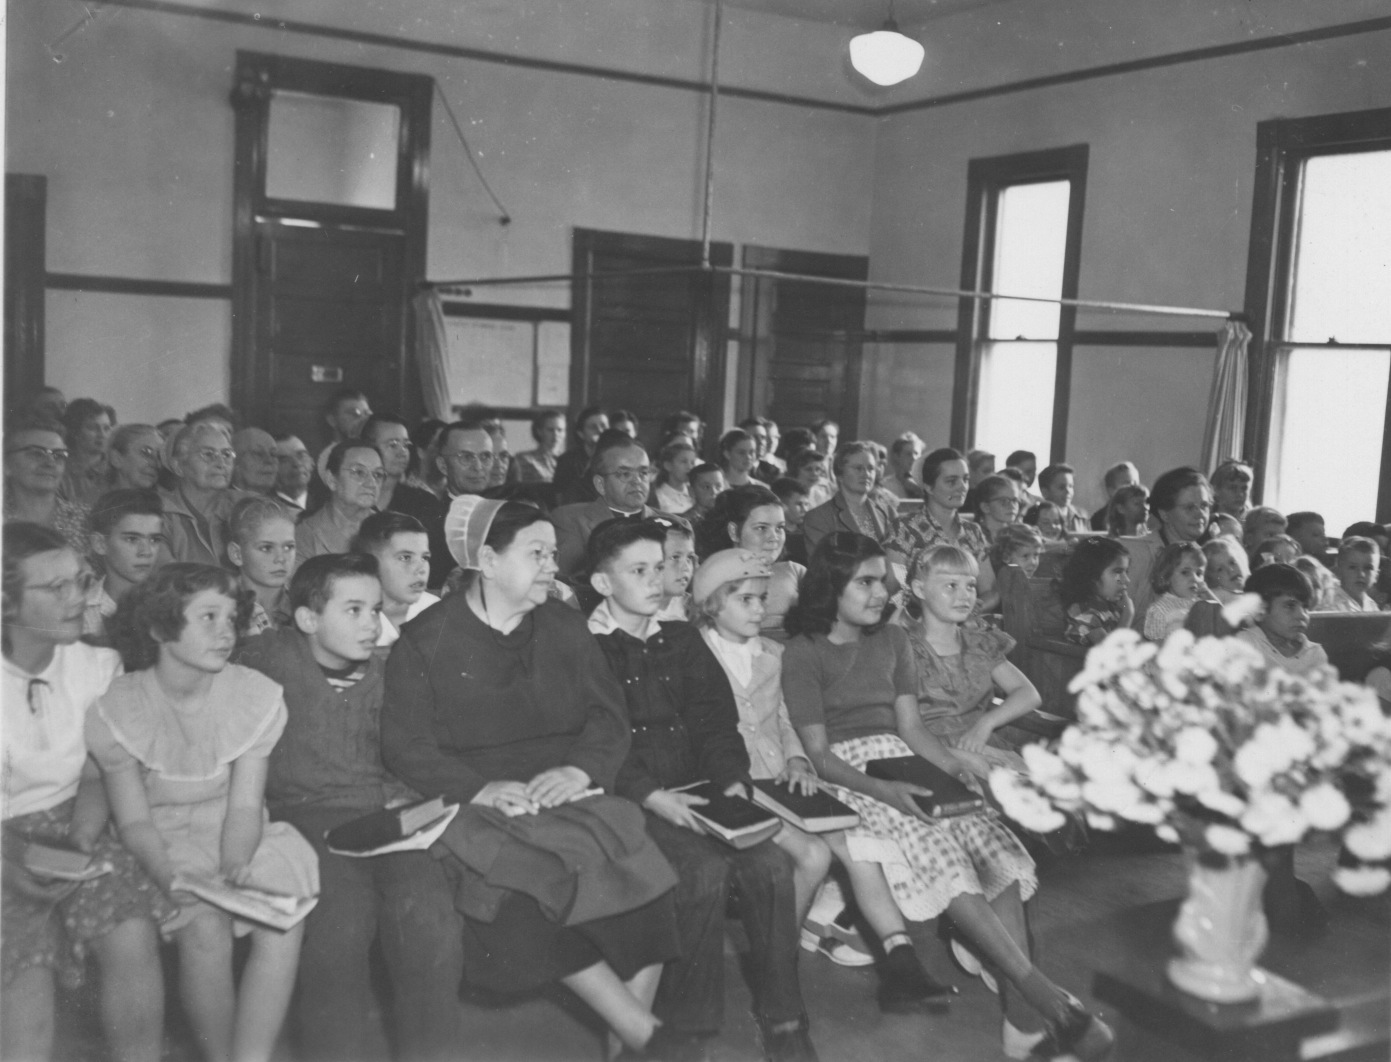 An image of the Chino congregation in the 1920s, shortly after the Brethren in Christ bought the old schoolhouse building (Brethren in Christ Historical Library and Archives)